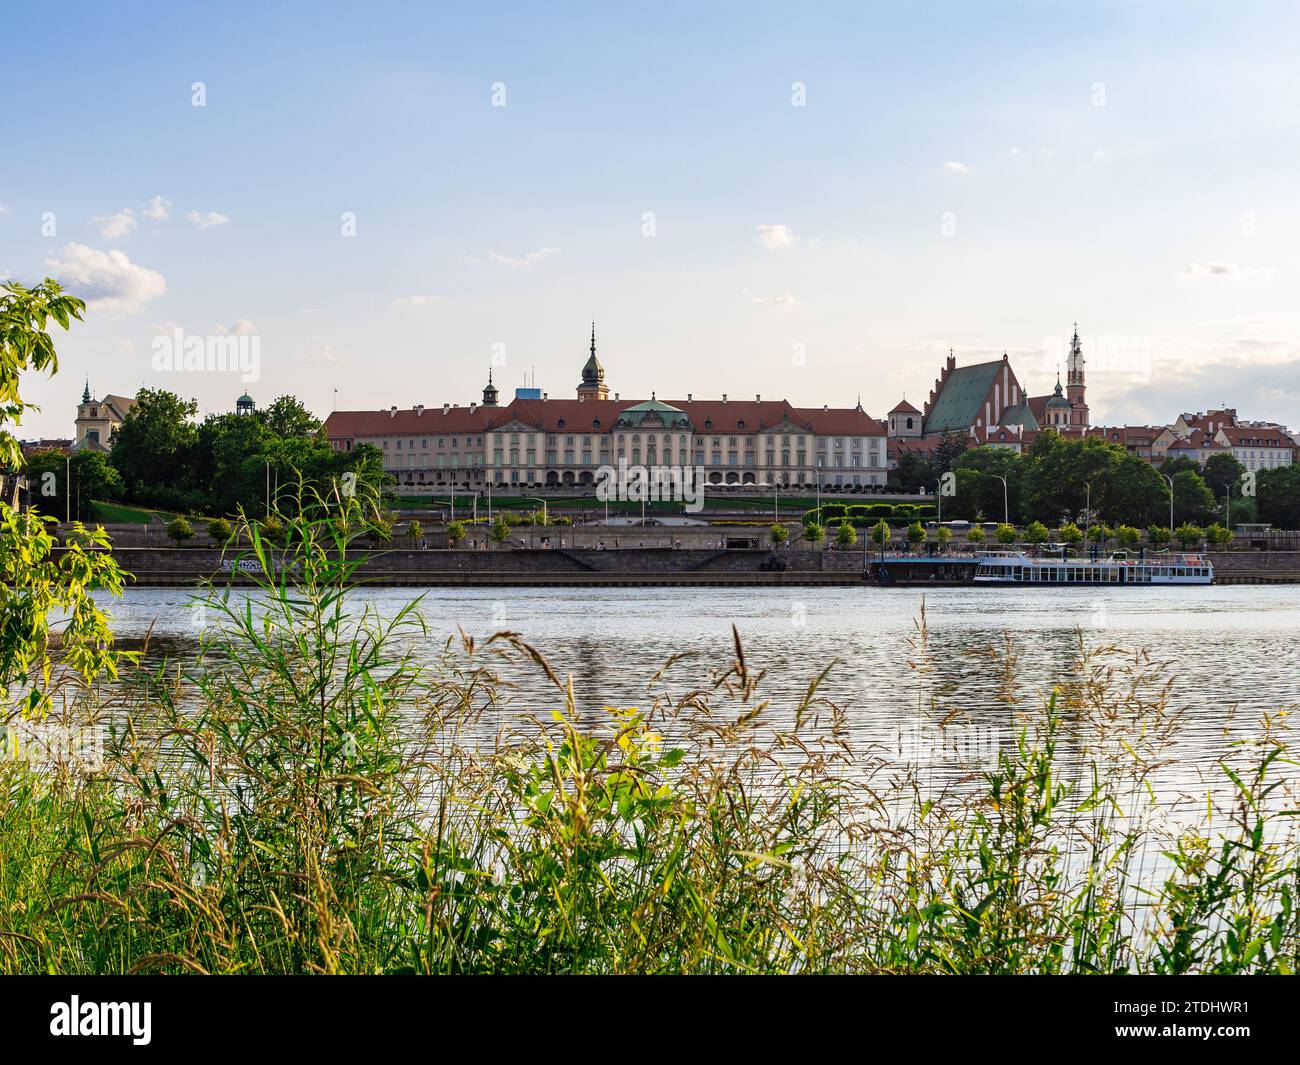 Warsaw, Masovia, Poland - July 10 2023: View of Warsaw Royal Castle and the Old Town Seen from the Opposite Bank of the Vistula River. Early Evening. Stock Photo